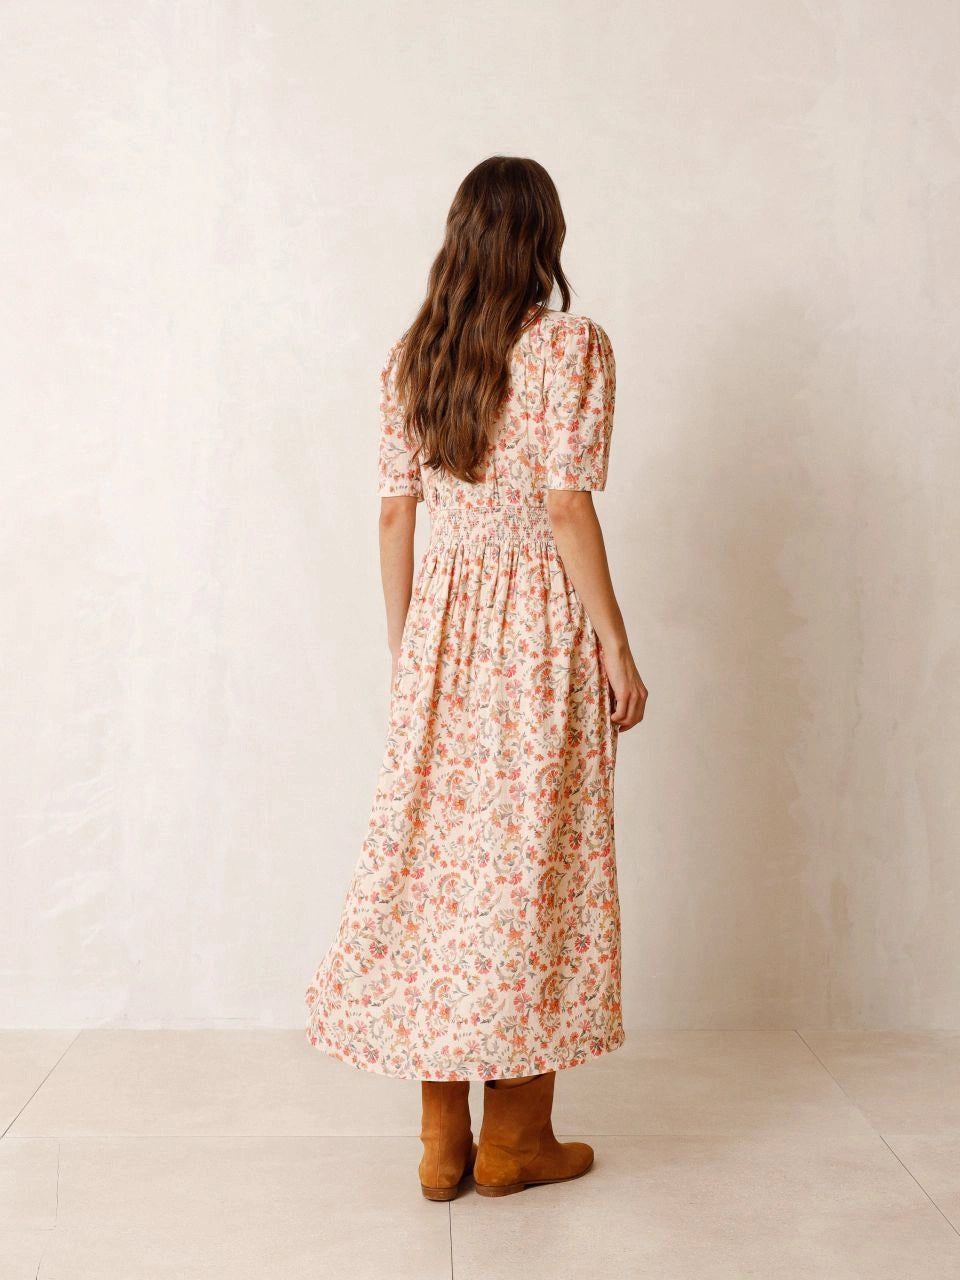 Robe Florale Luise | Indi et froid